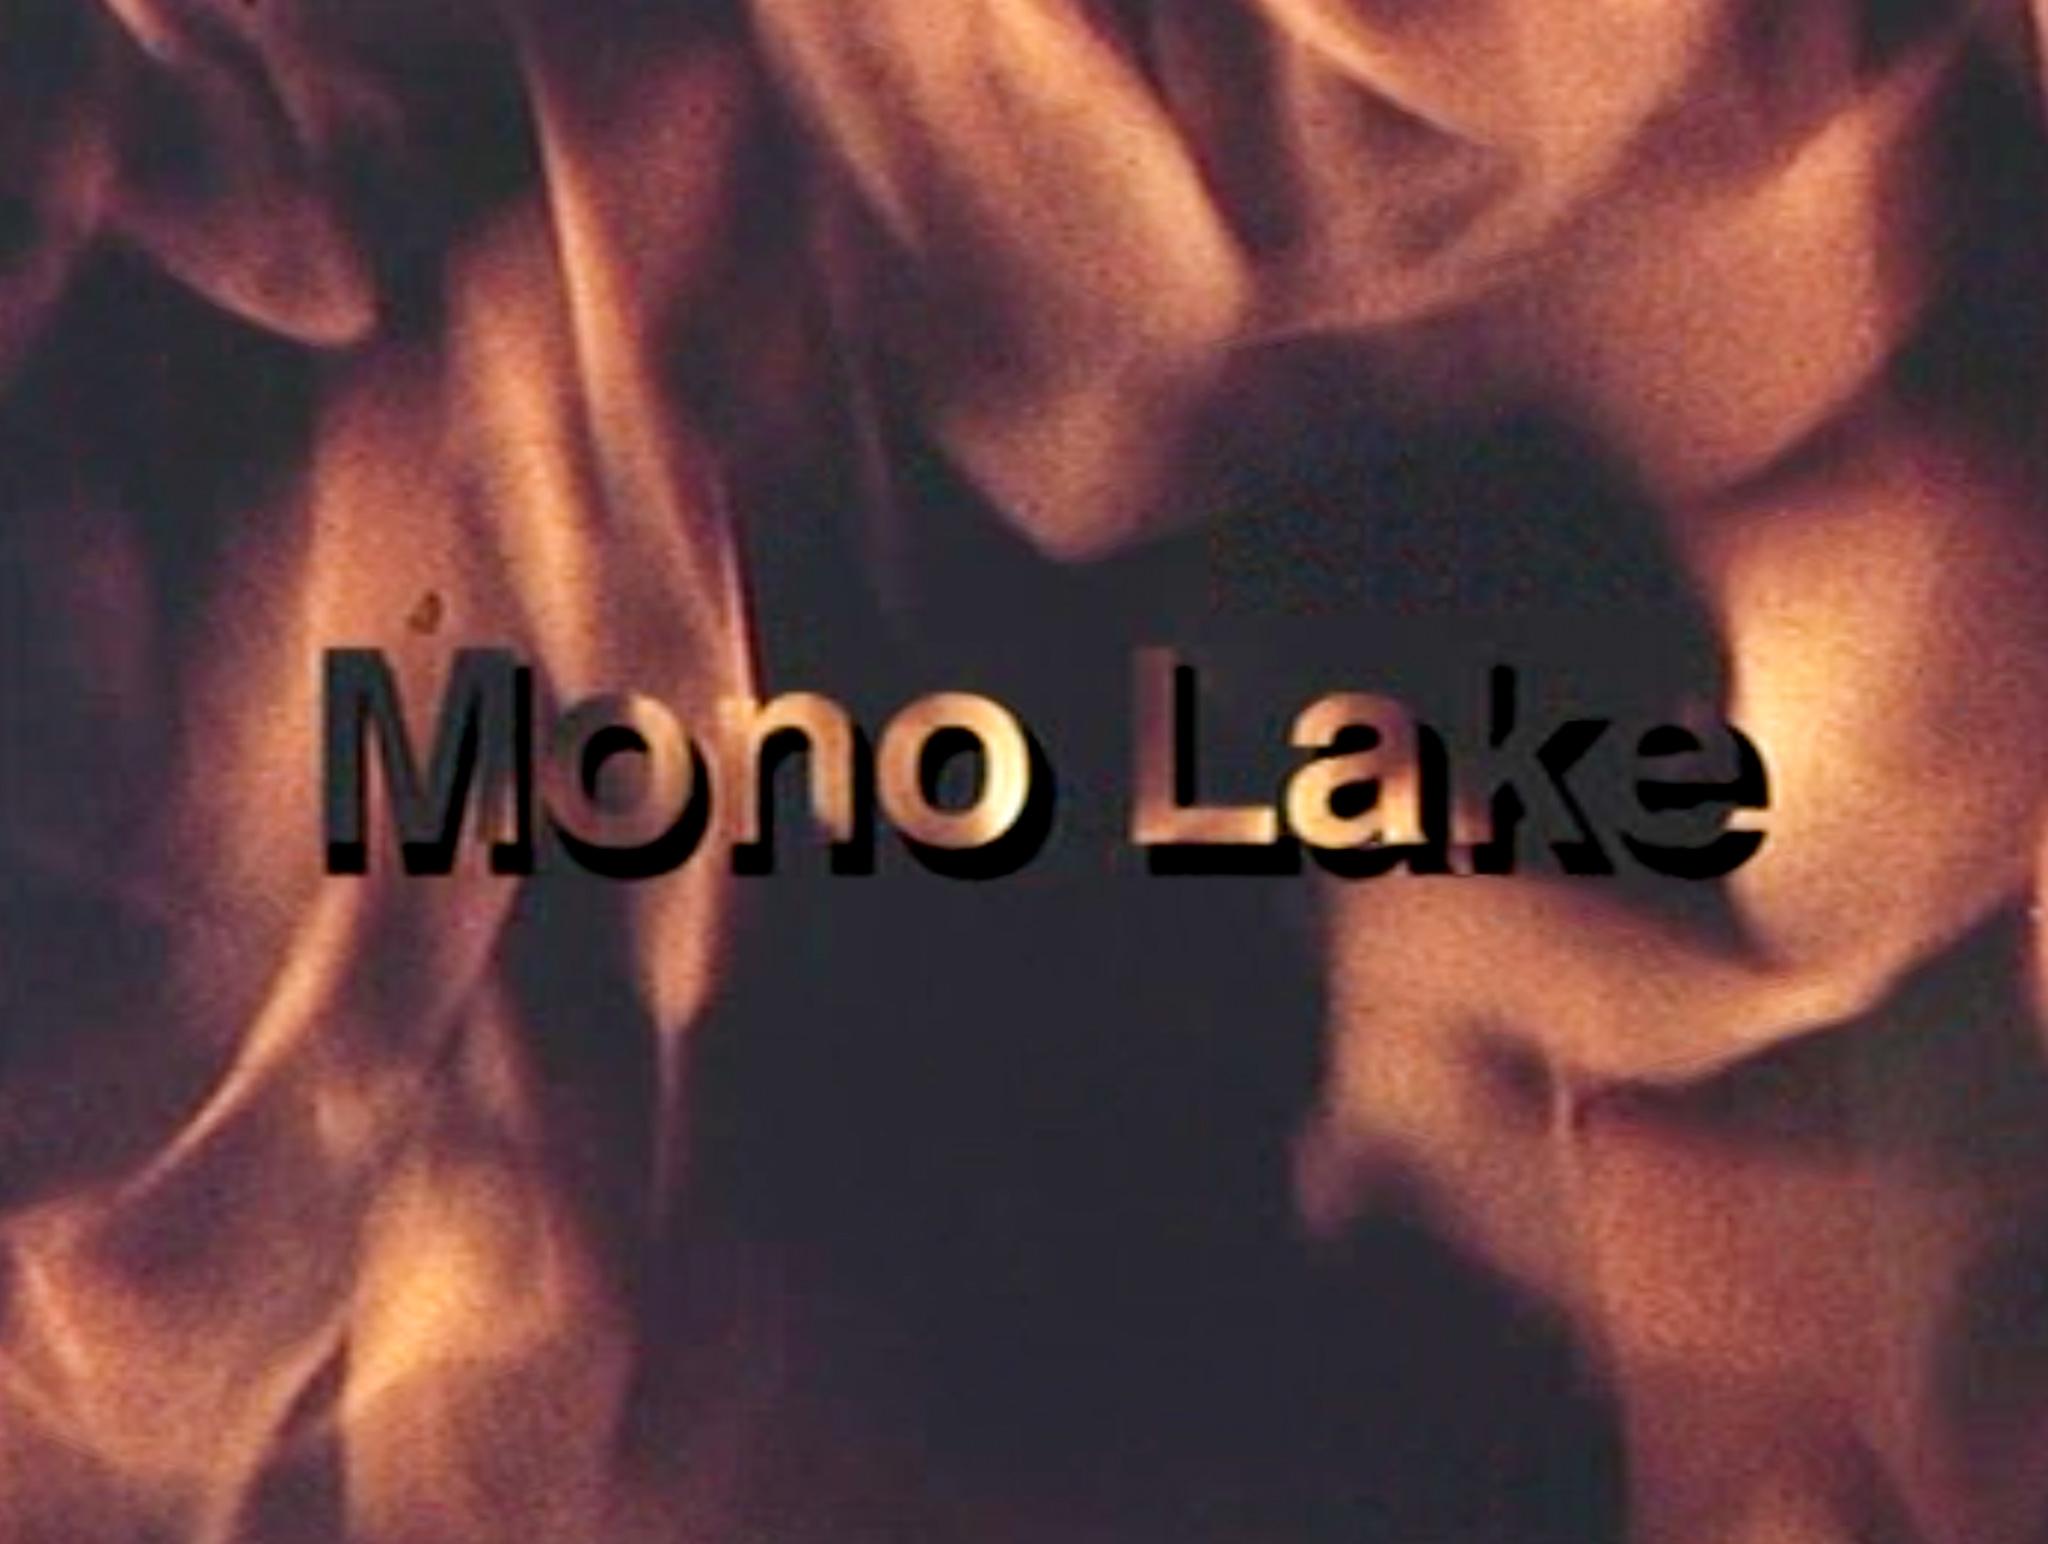 A title text for the film Mono Lake over a flaming background